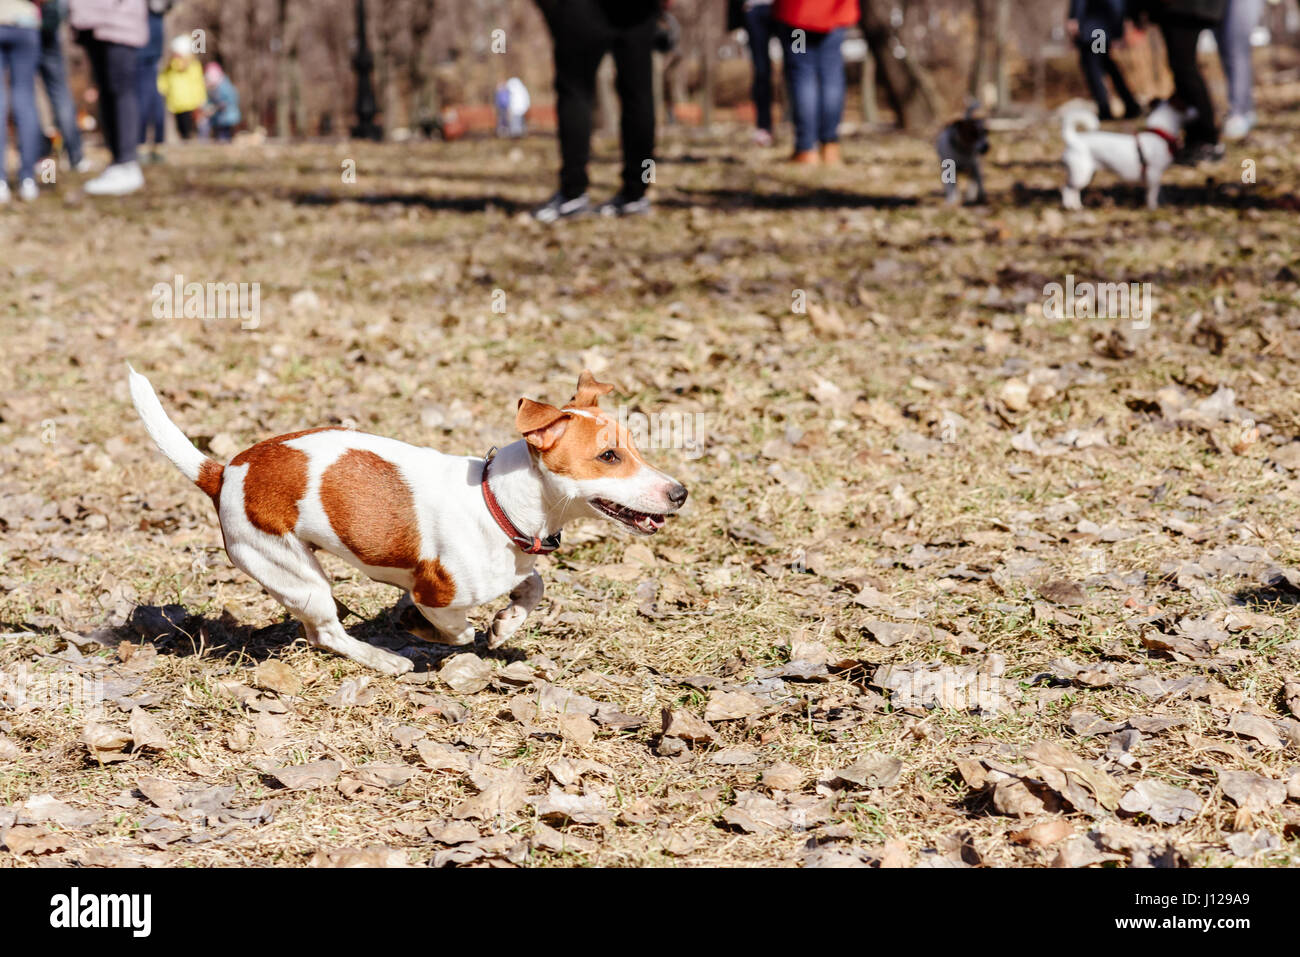 Dog at doggy park running off-leash under supervision of owner Stock Photo